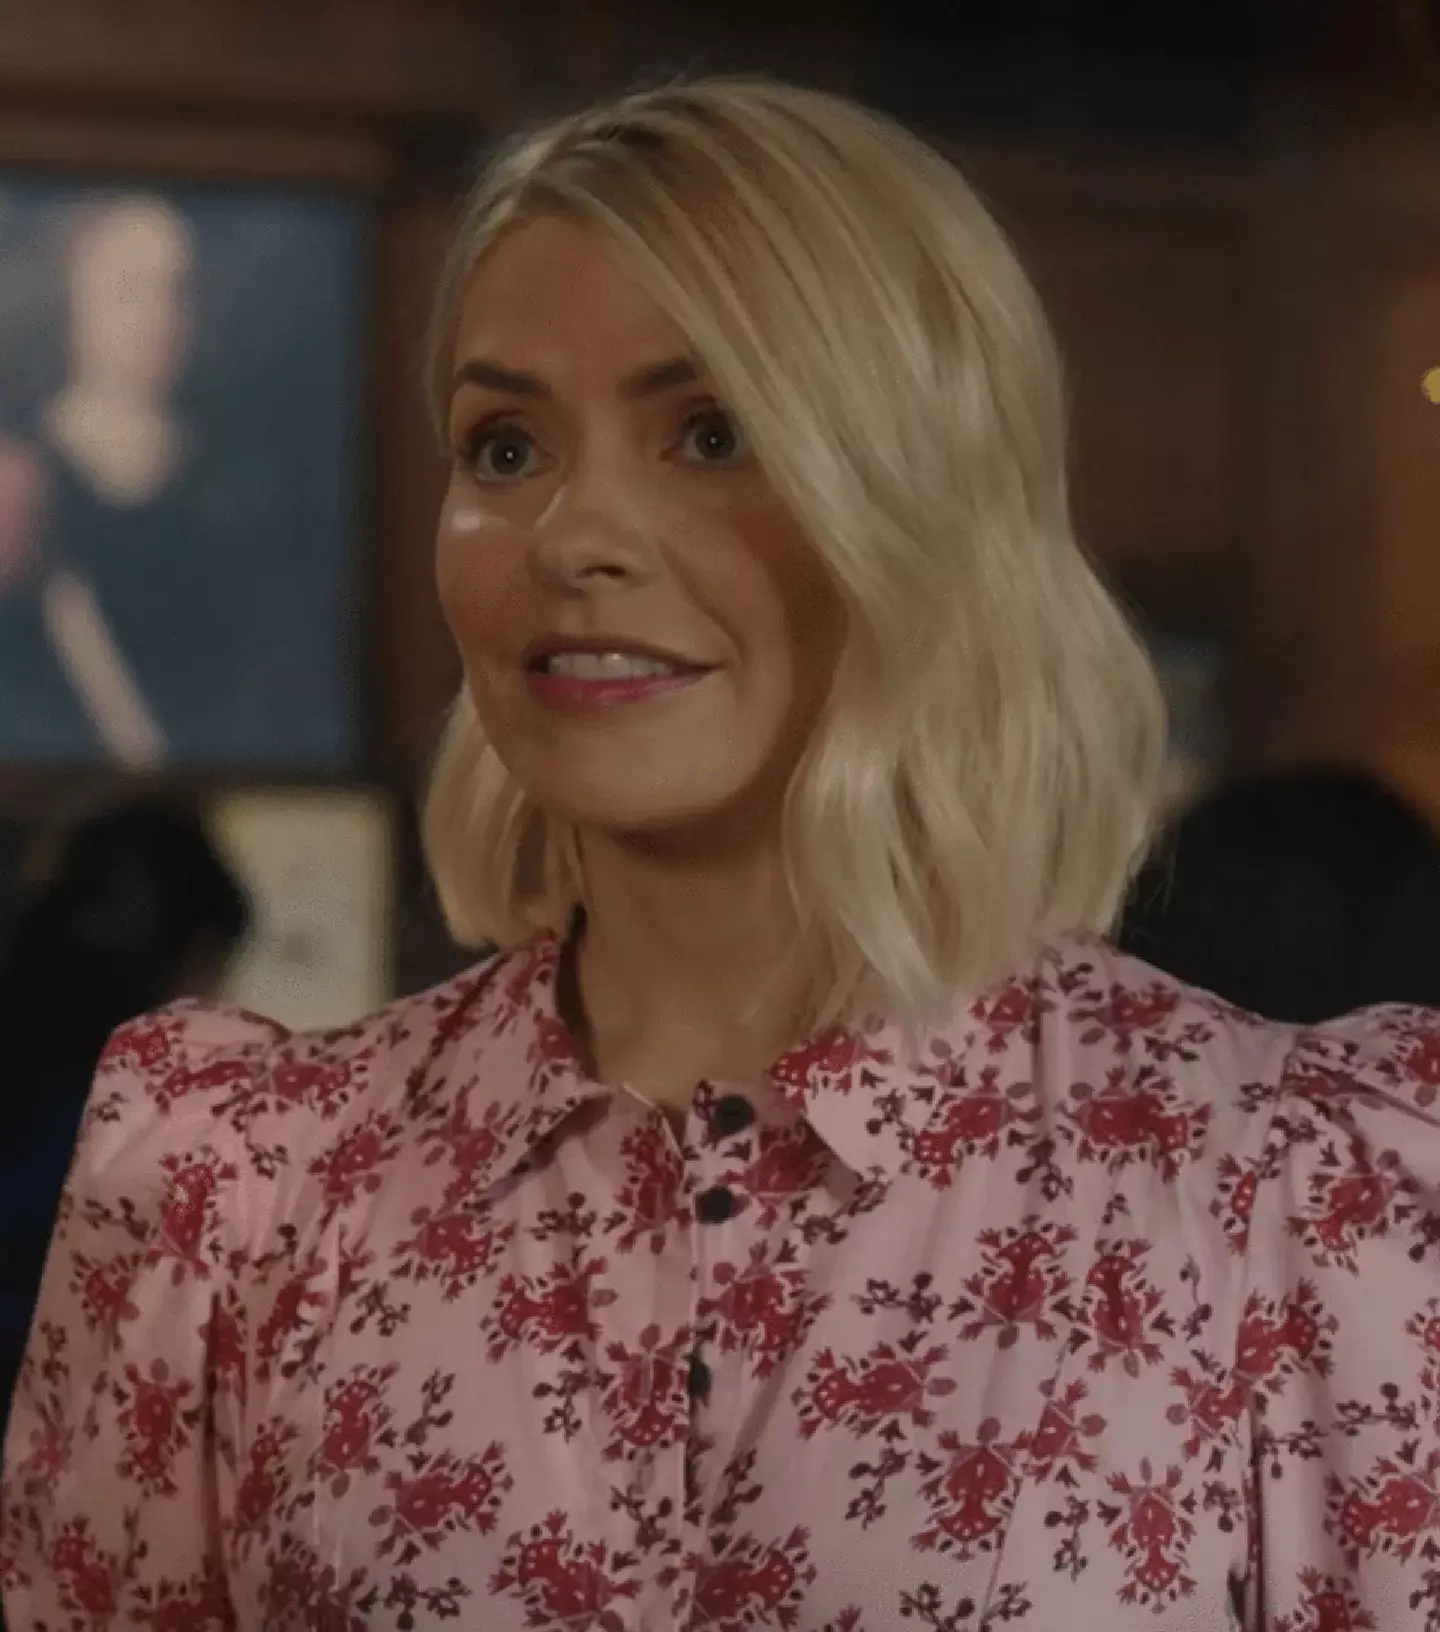 Holly Willoughby popped up in Midsomer Murders last night.